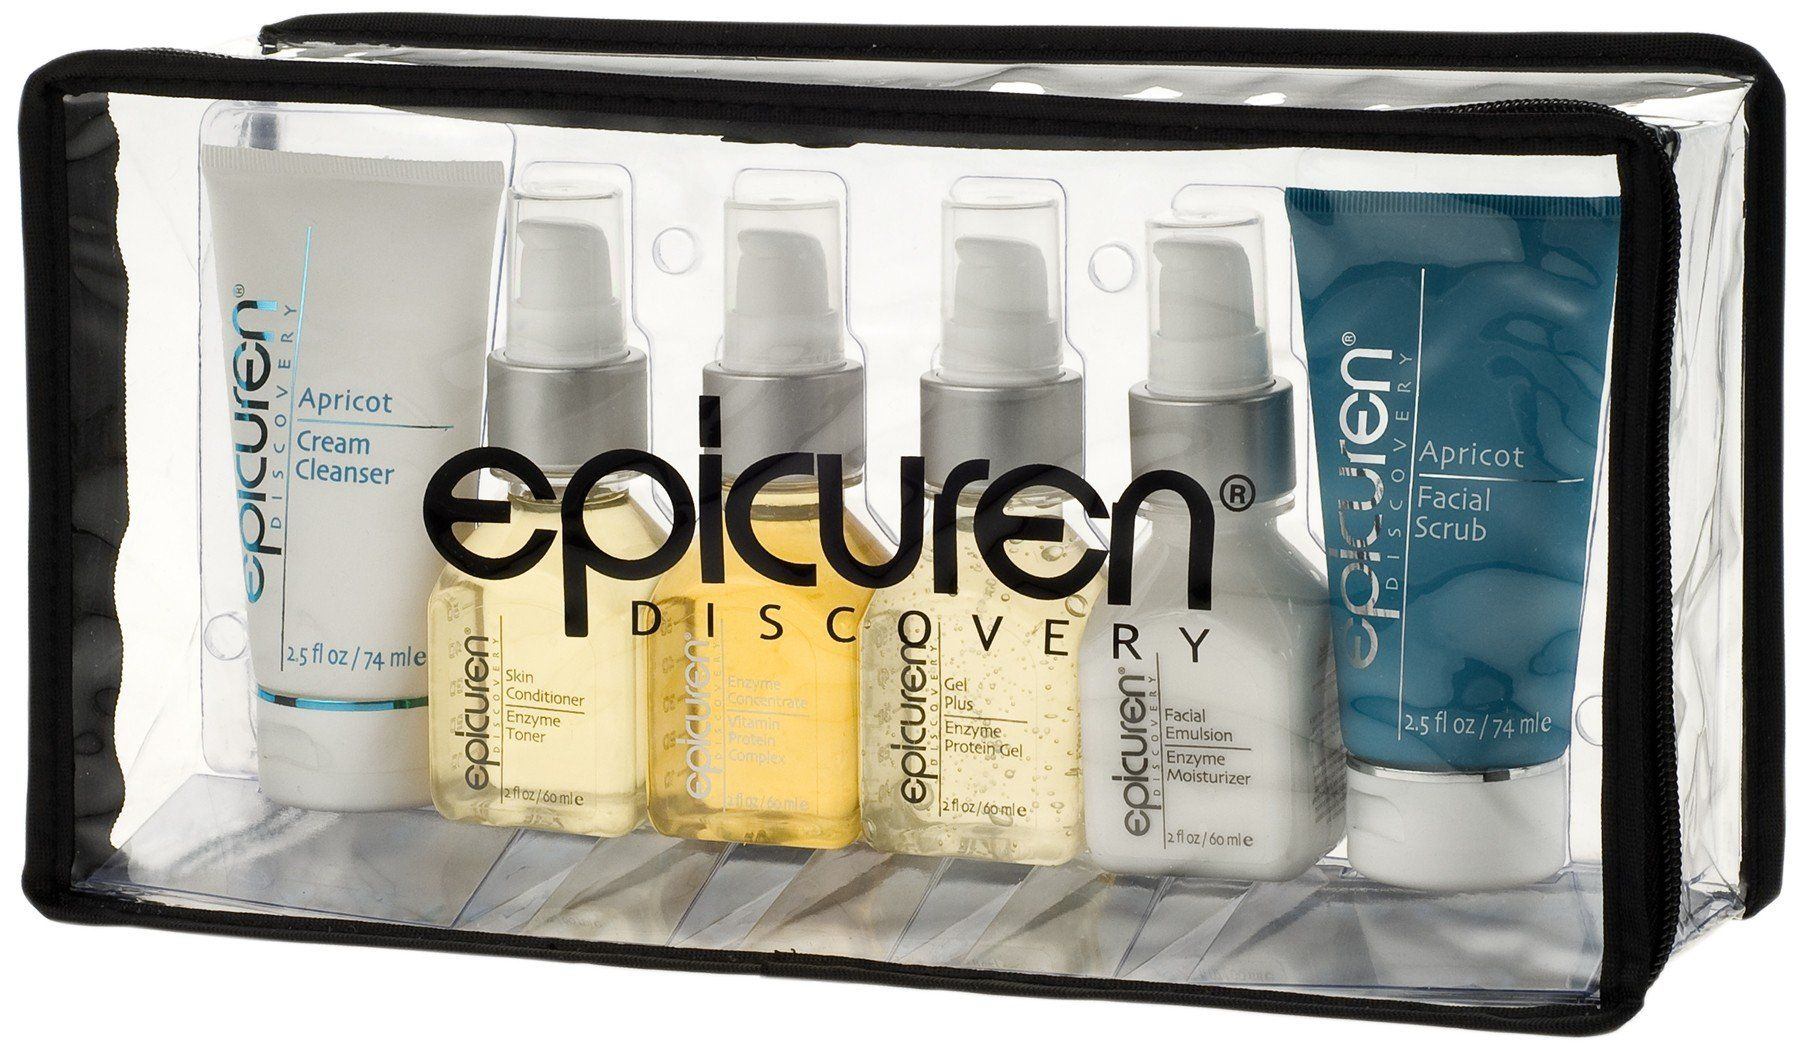 Epicuren discovery facial cleanser